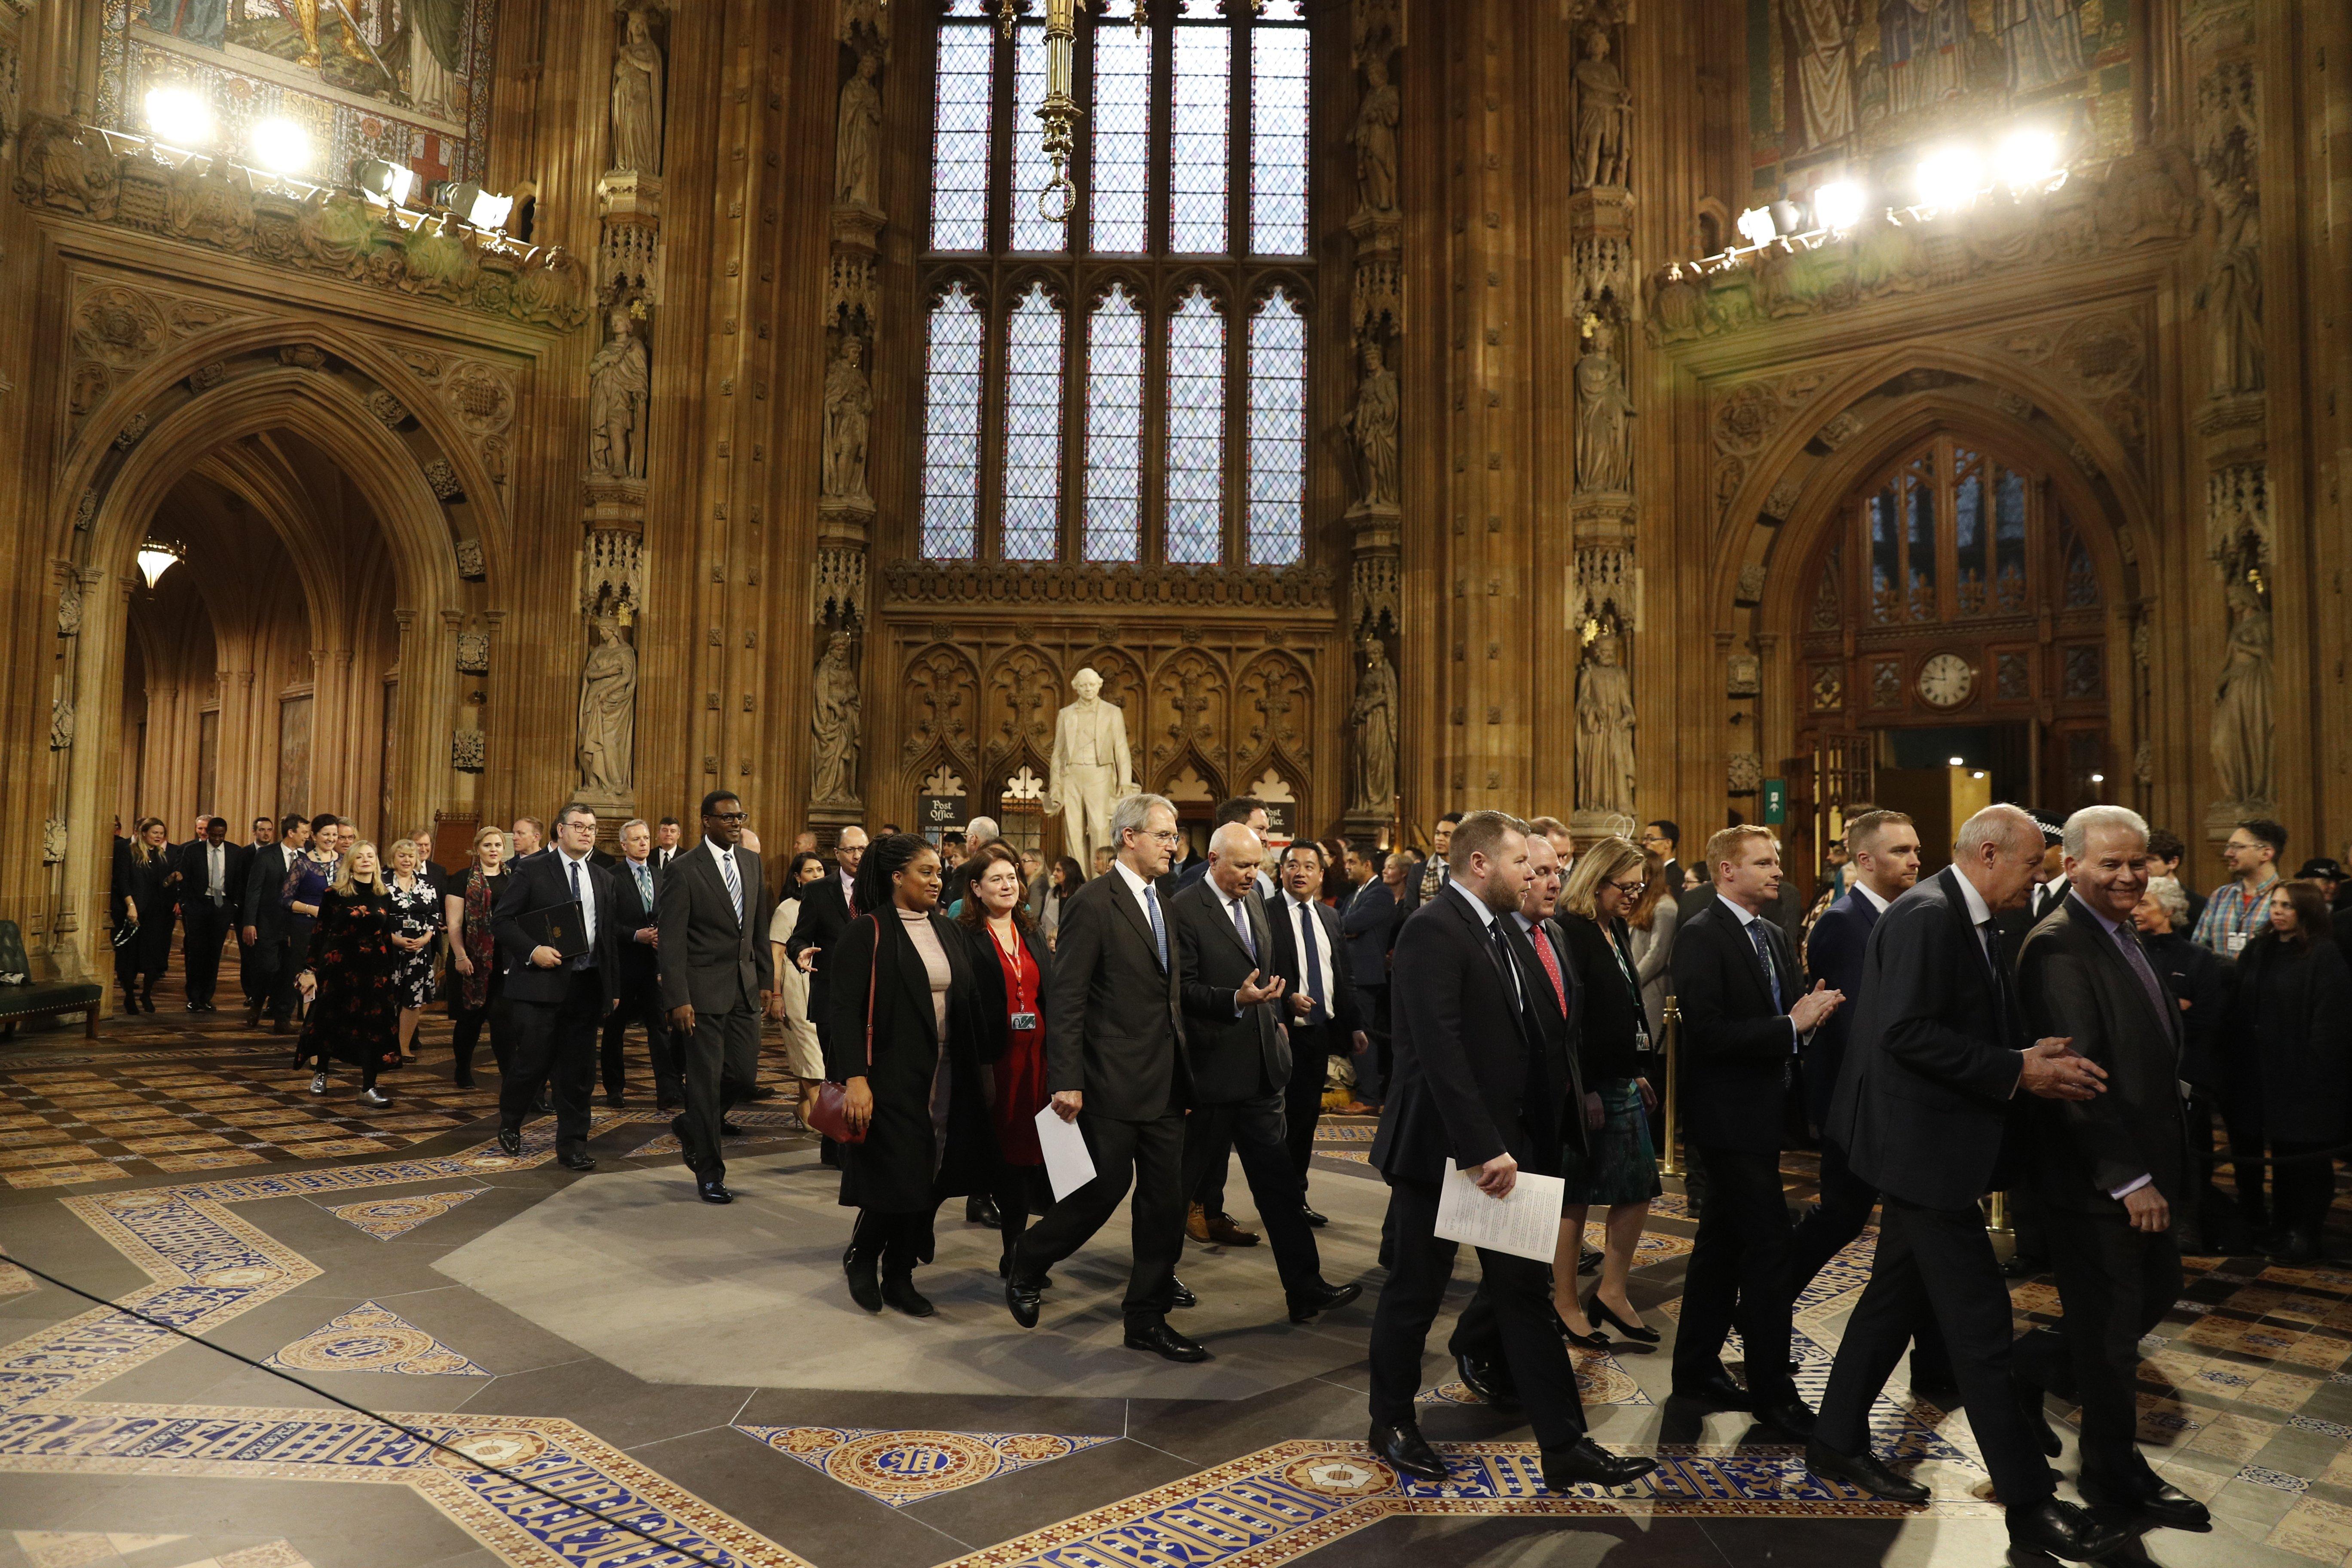 Members of Parliament process through the Central Lobby from the Lords chamber back to the House of Commons following the State Opening of Parliament by Queen Elizabeth II, in the House of Lords at the Palace of Westminster in London.